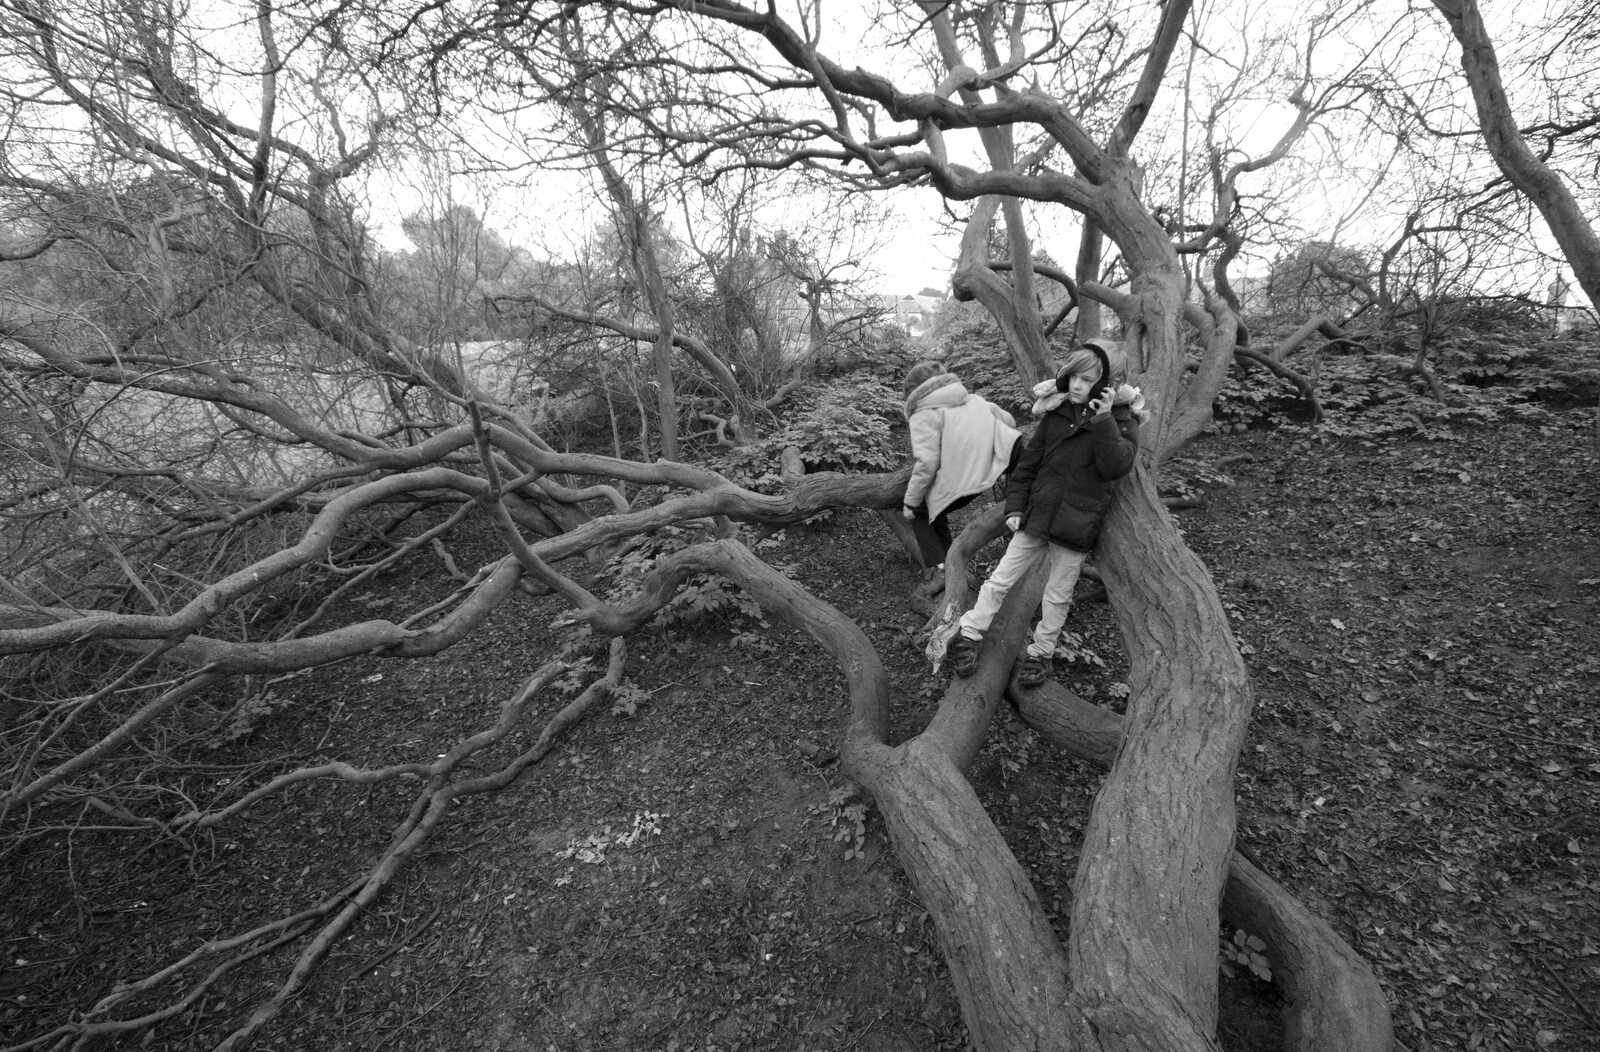 A Trip to Orford, Suffolk - 25th January 2020: Black and white trees